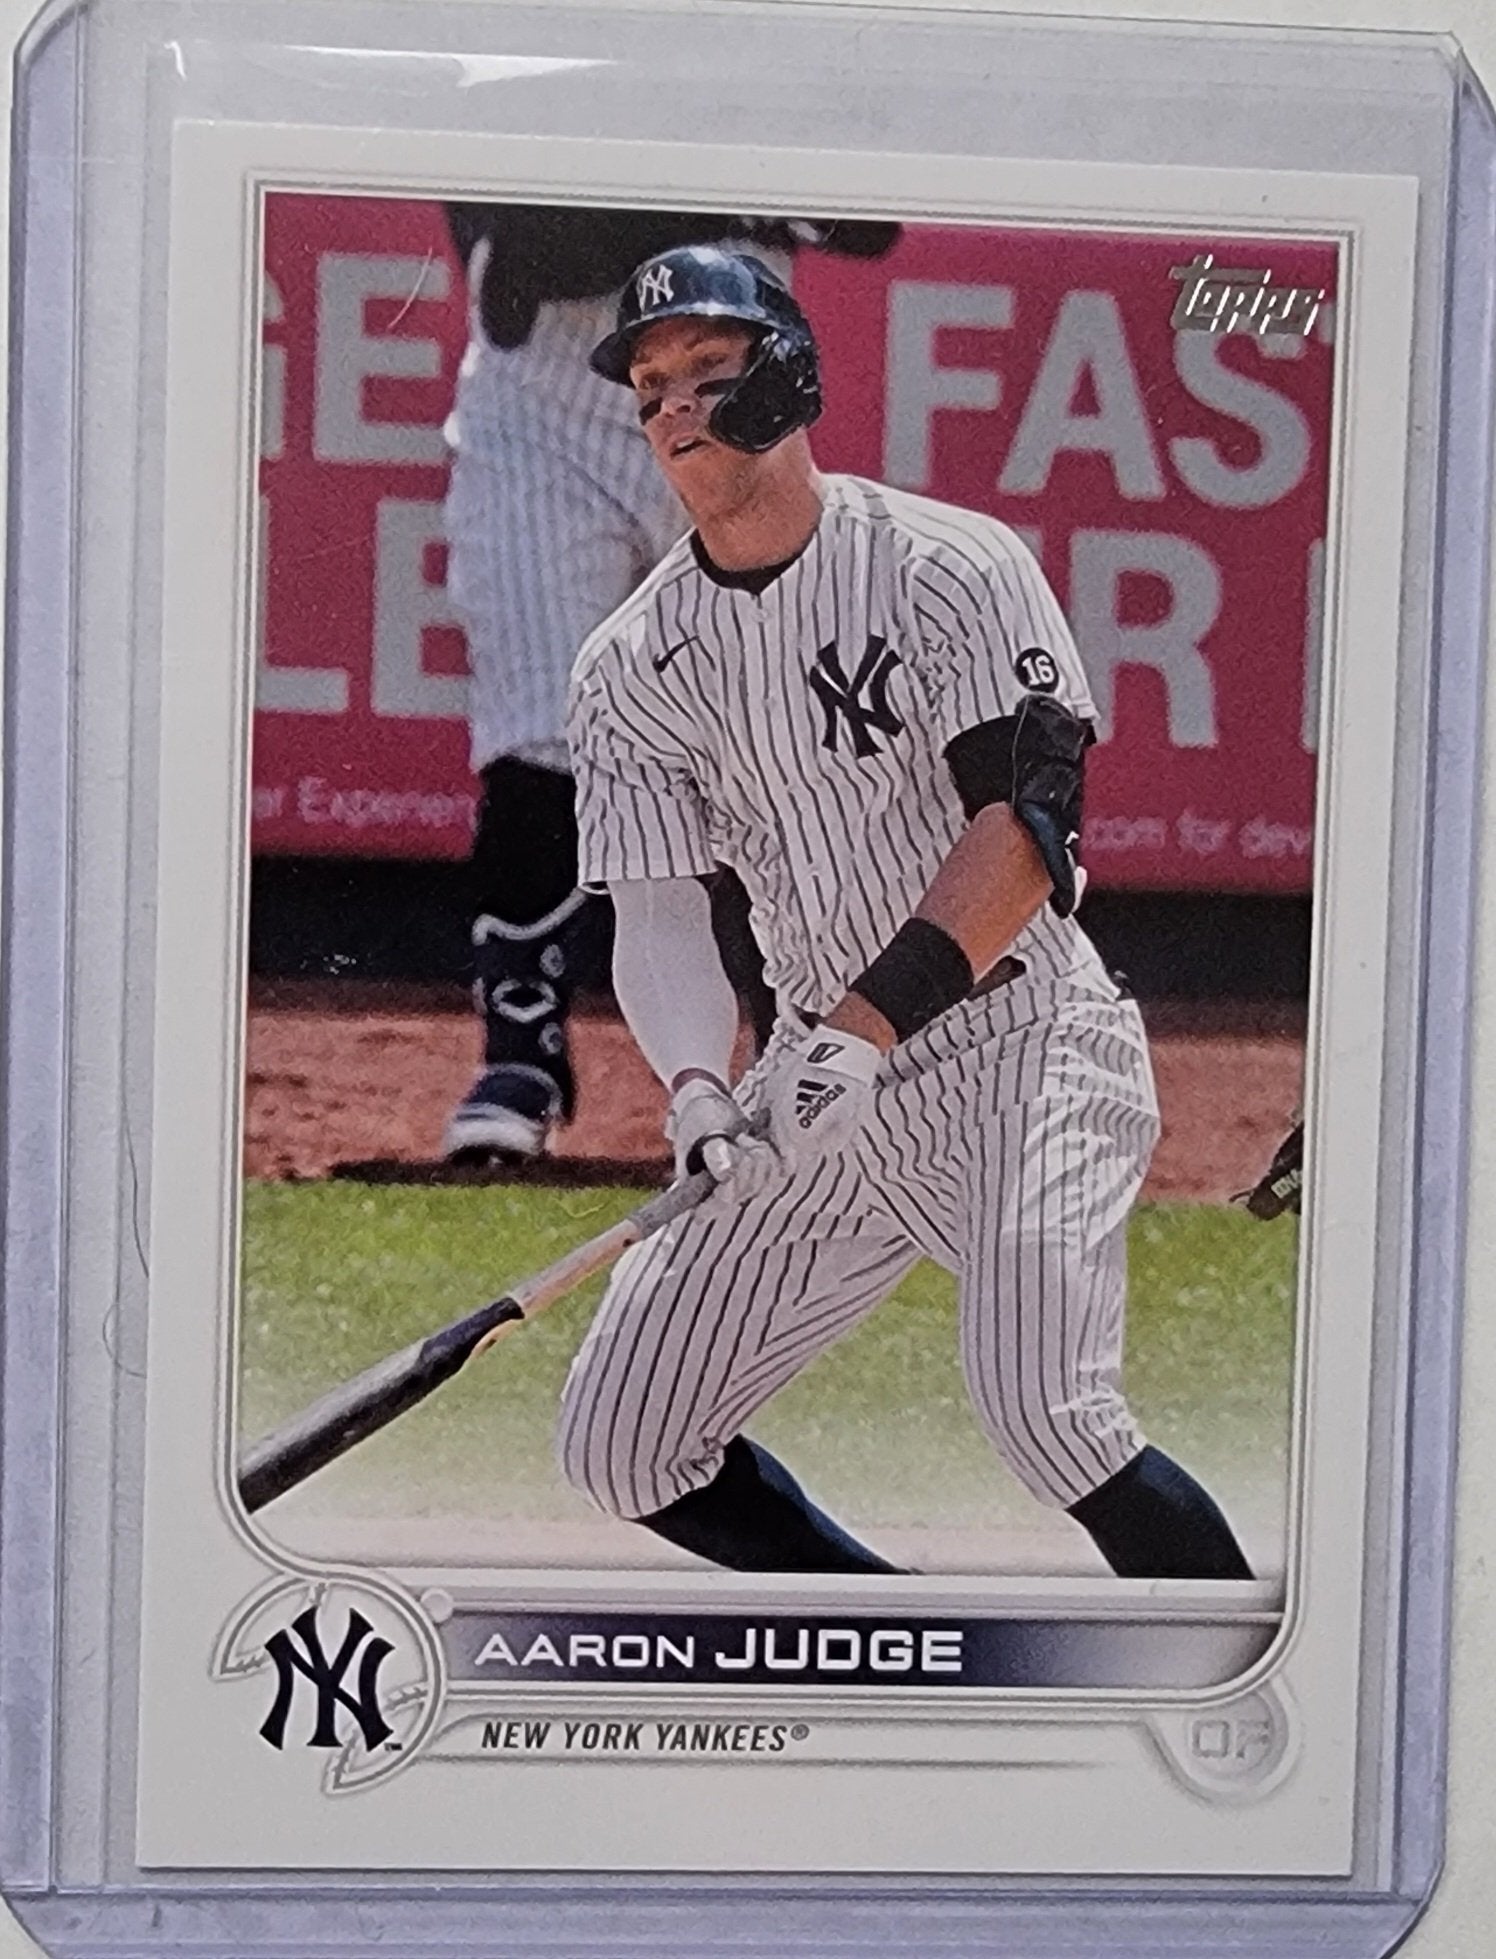 2022 Topps Series 2 Aaron Judge Baseball Card AVM1 simple Xclusive Collectibles   